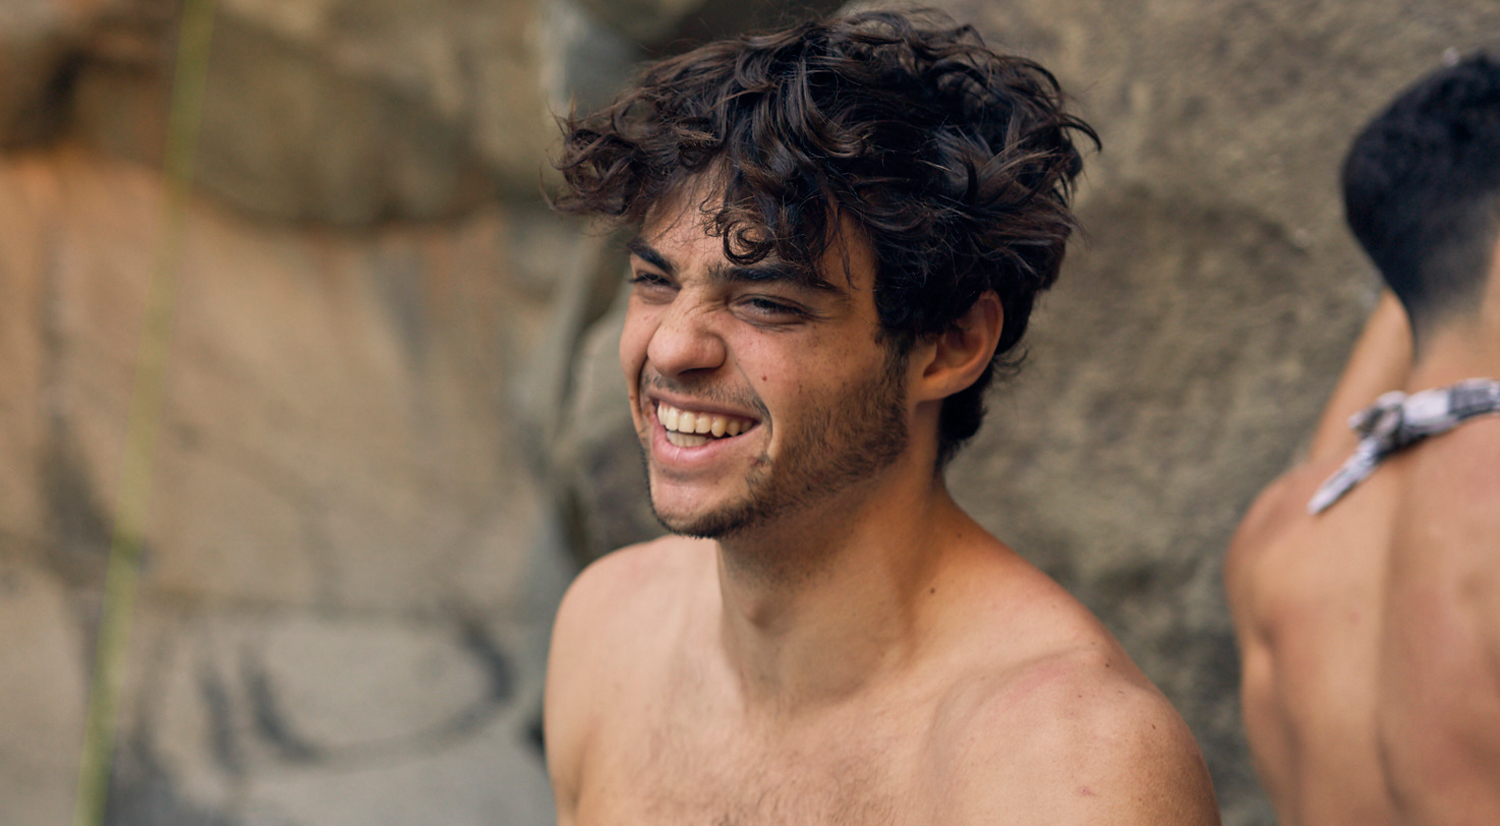 Noah Centineo Goes Shirtless During Trip Through Spain! | Noah Centineo ...